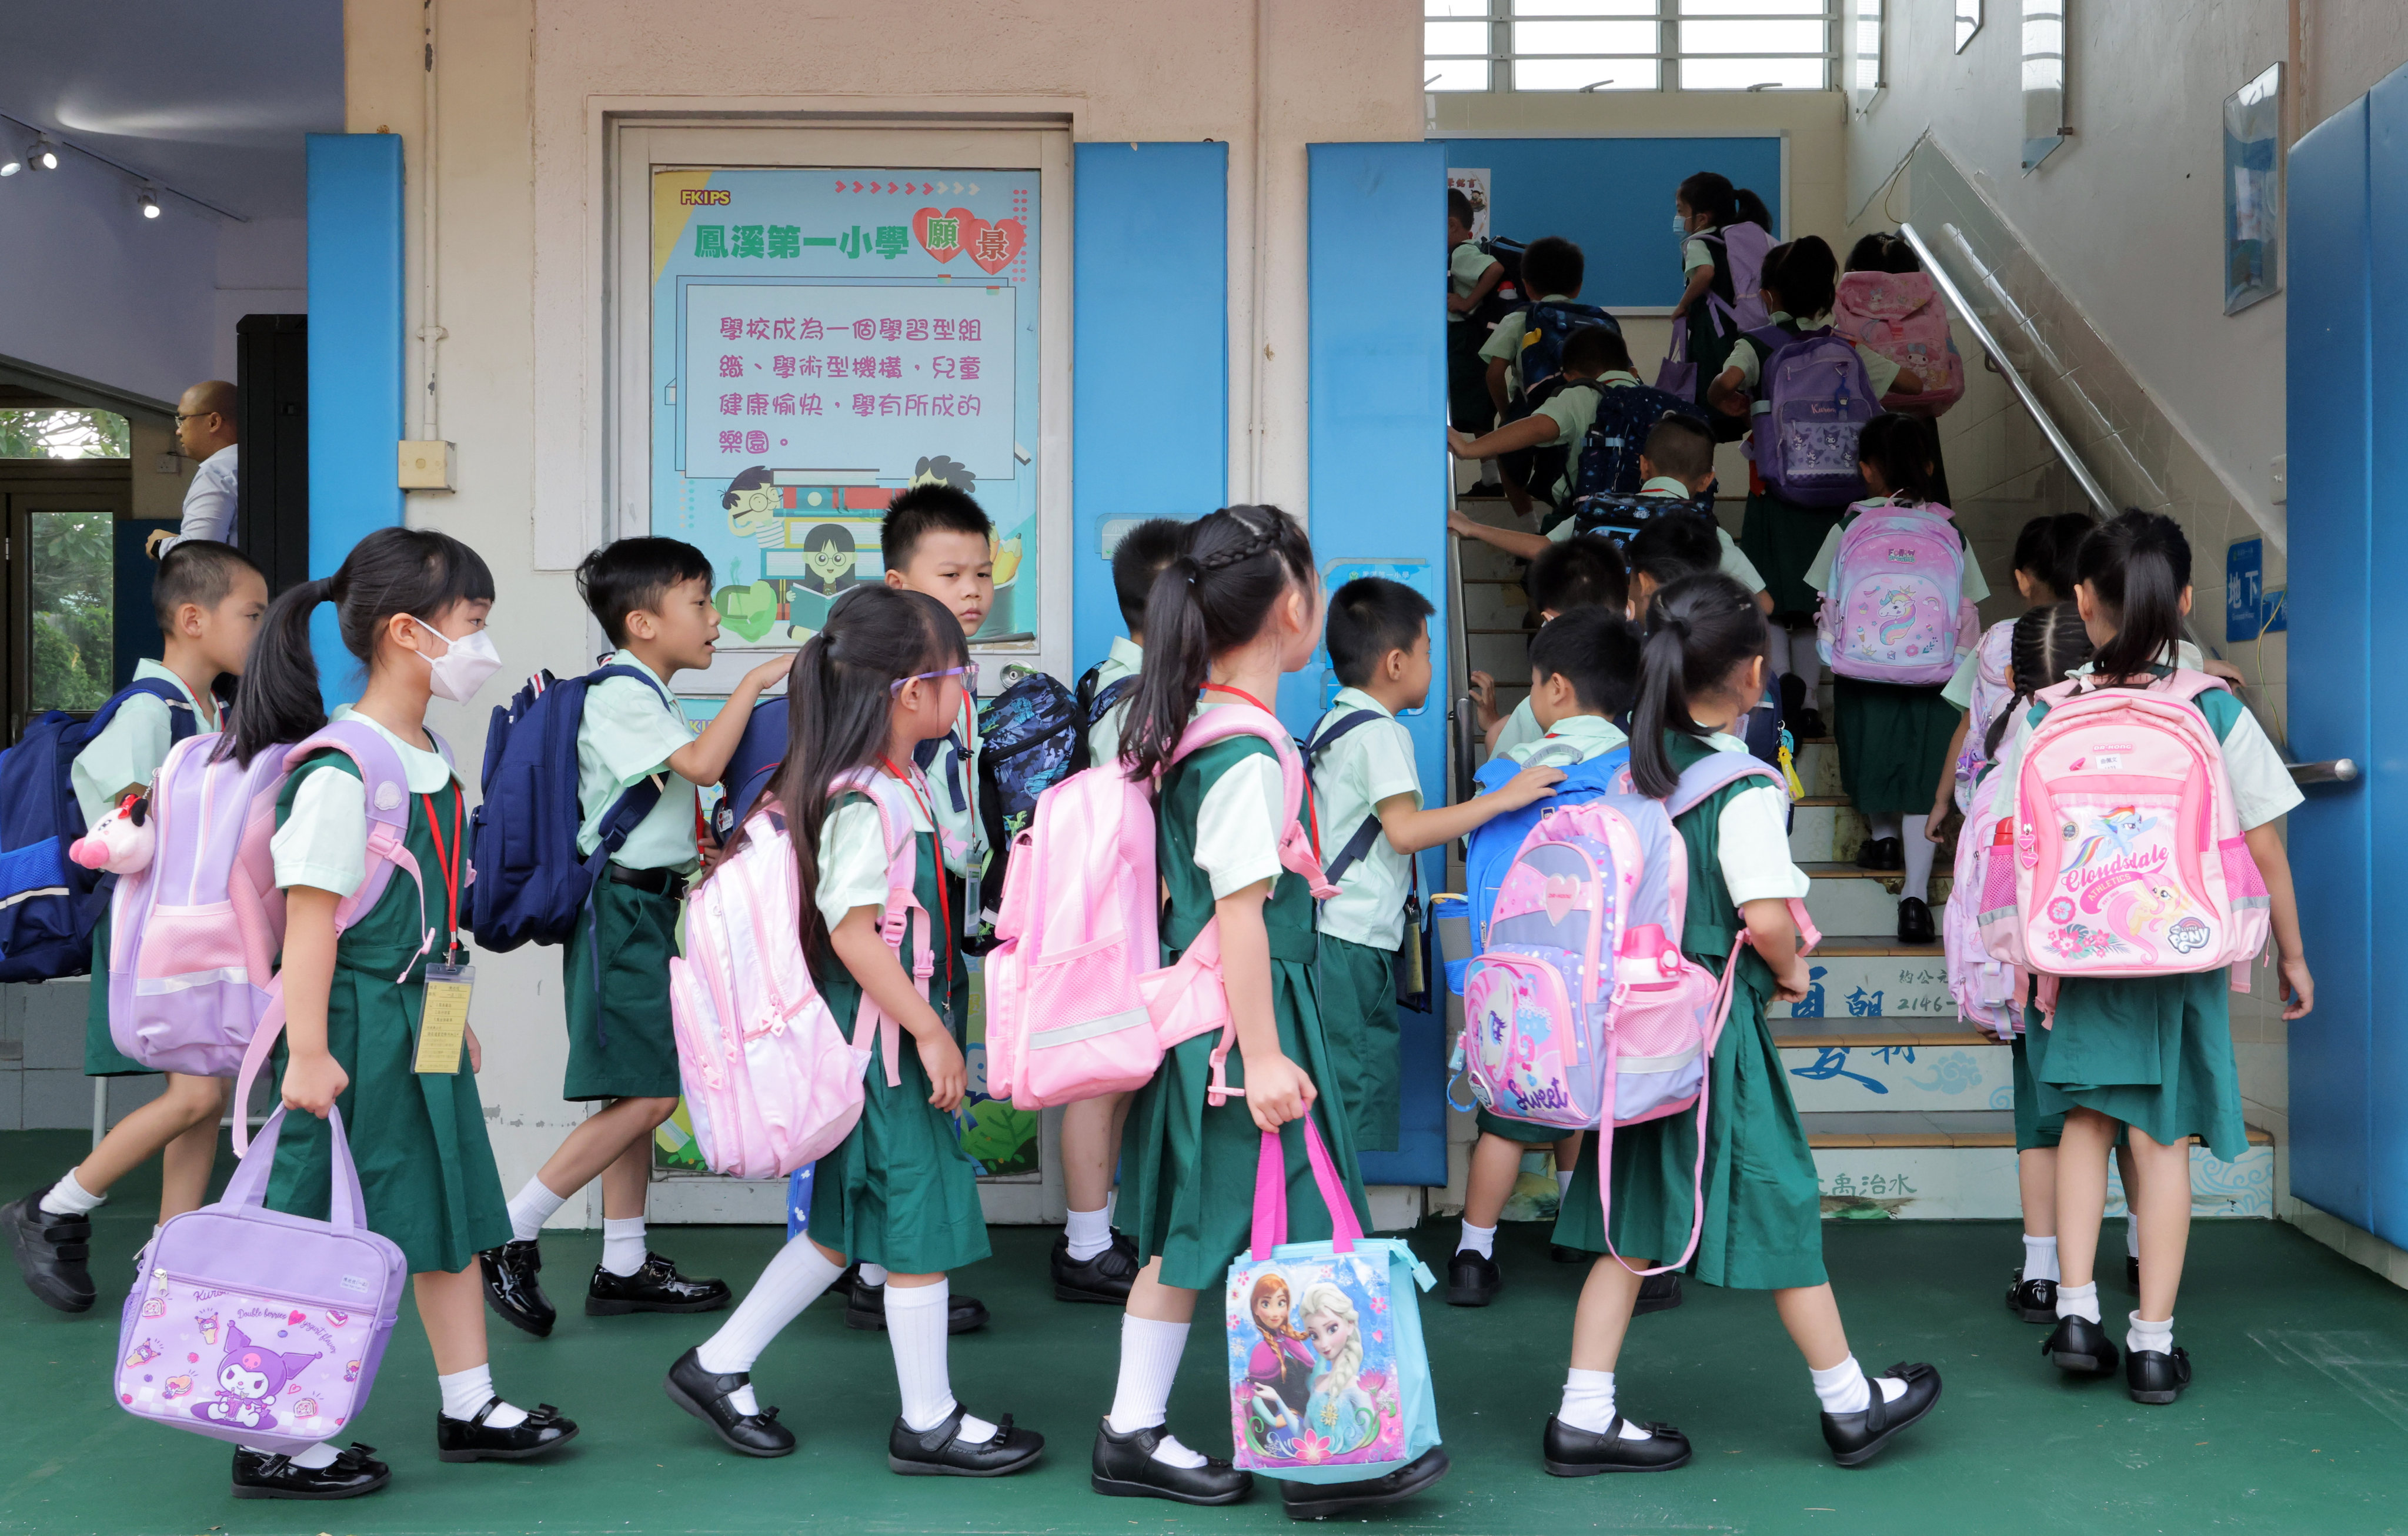 Hong Kong is bracing itself for a 36% drop in Primary One enrolments over the next six years. Photo: Jelly Tse